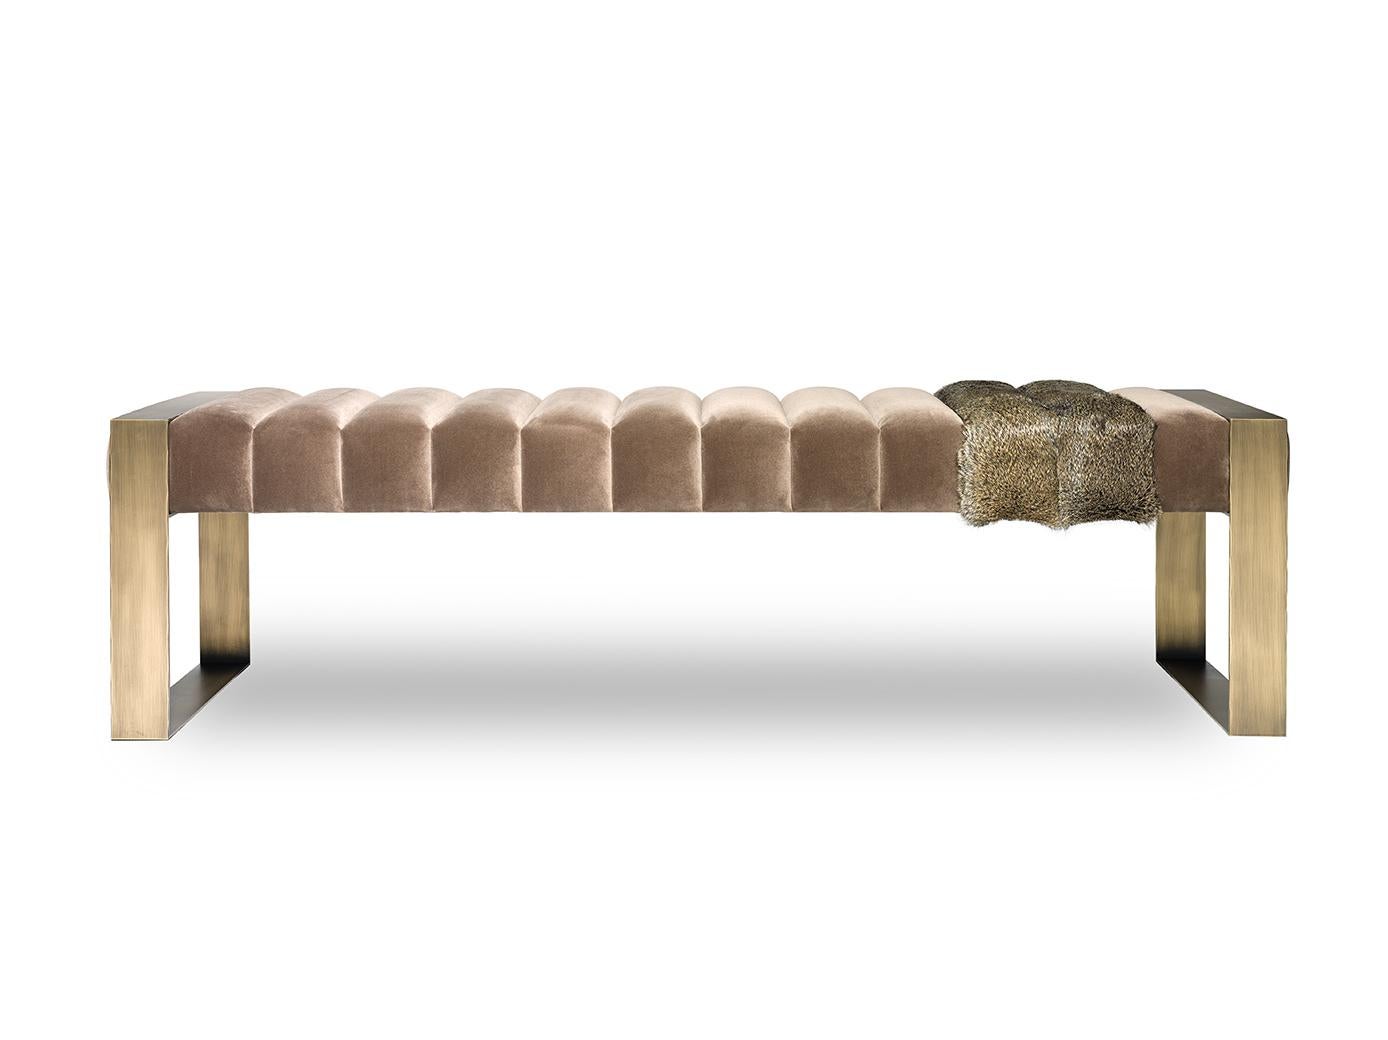 Contemporary bench is a statement design piece. The design is inspired by the pieces clear horizontal lines and stability that the stripes and open structure provides. This bench is a contemporary upholstered piece with an interesting twist of two